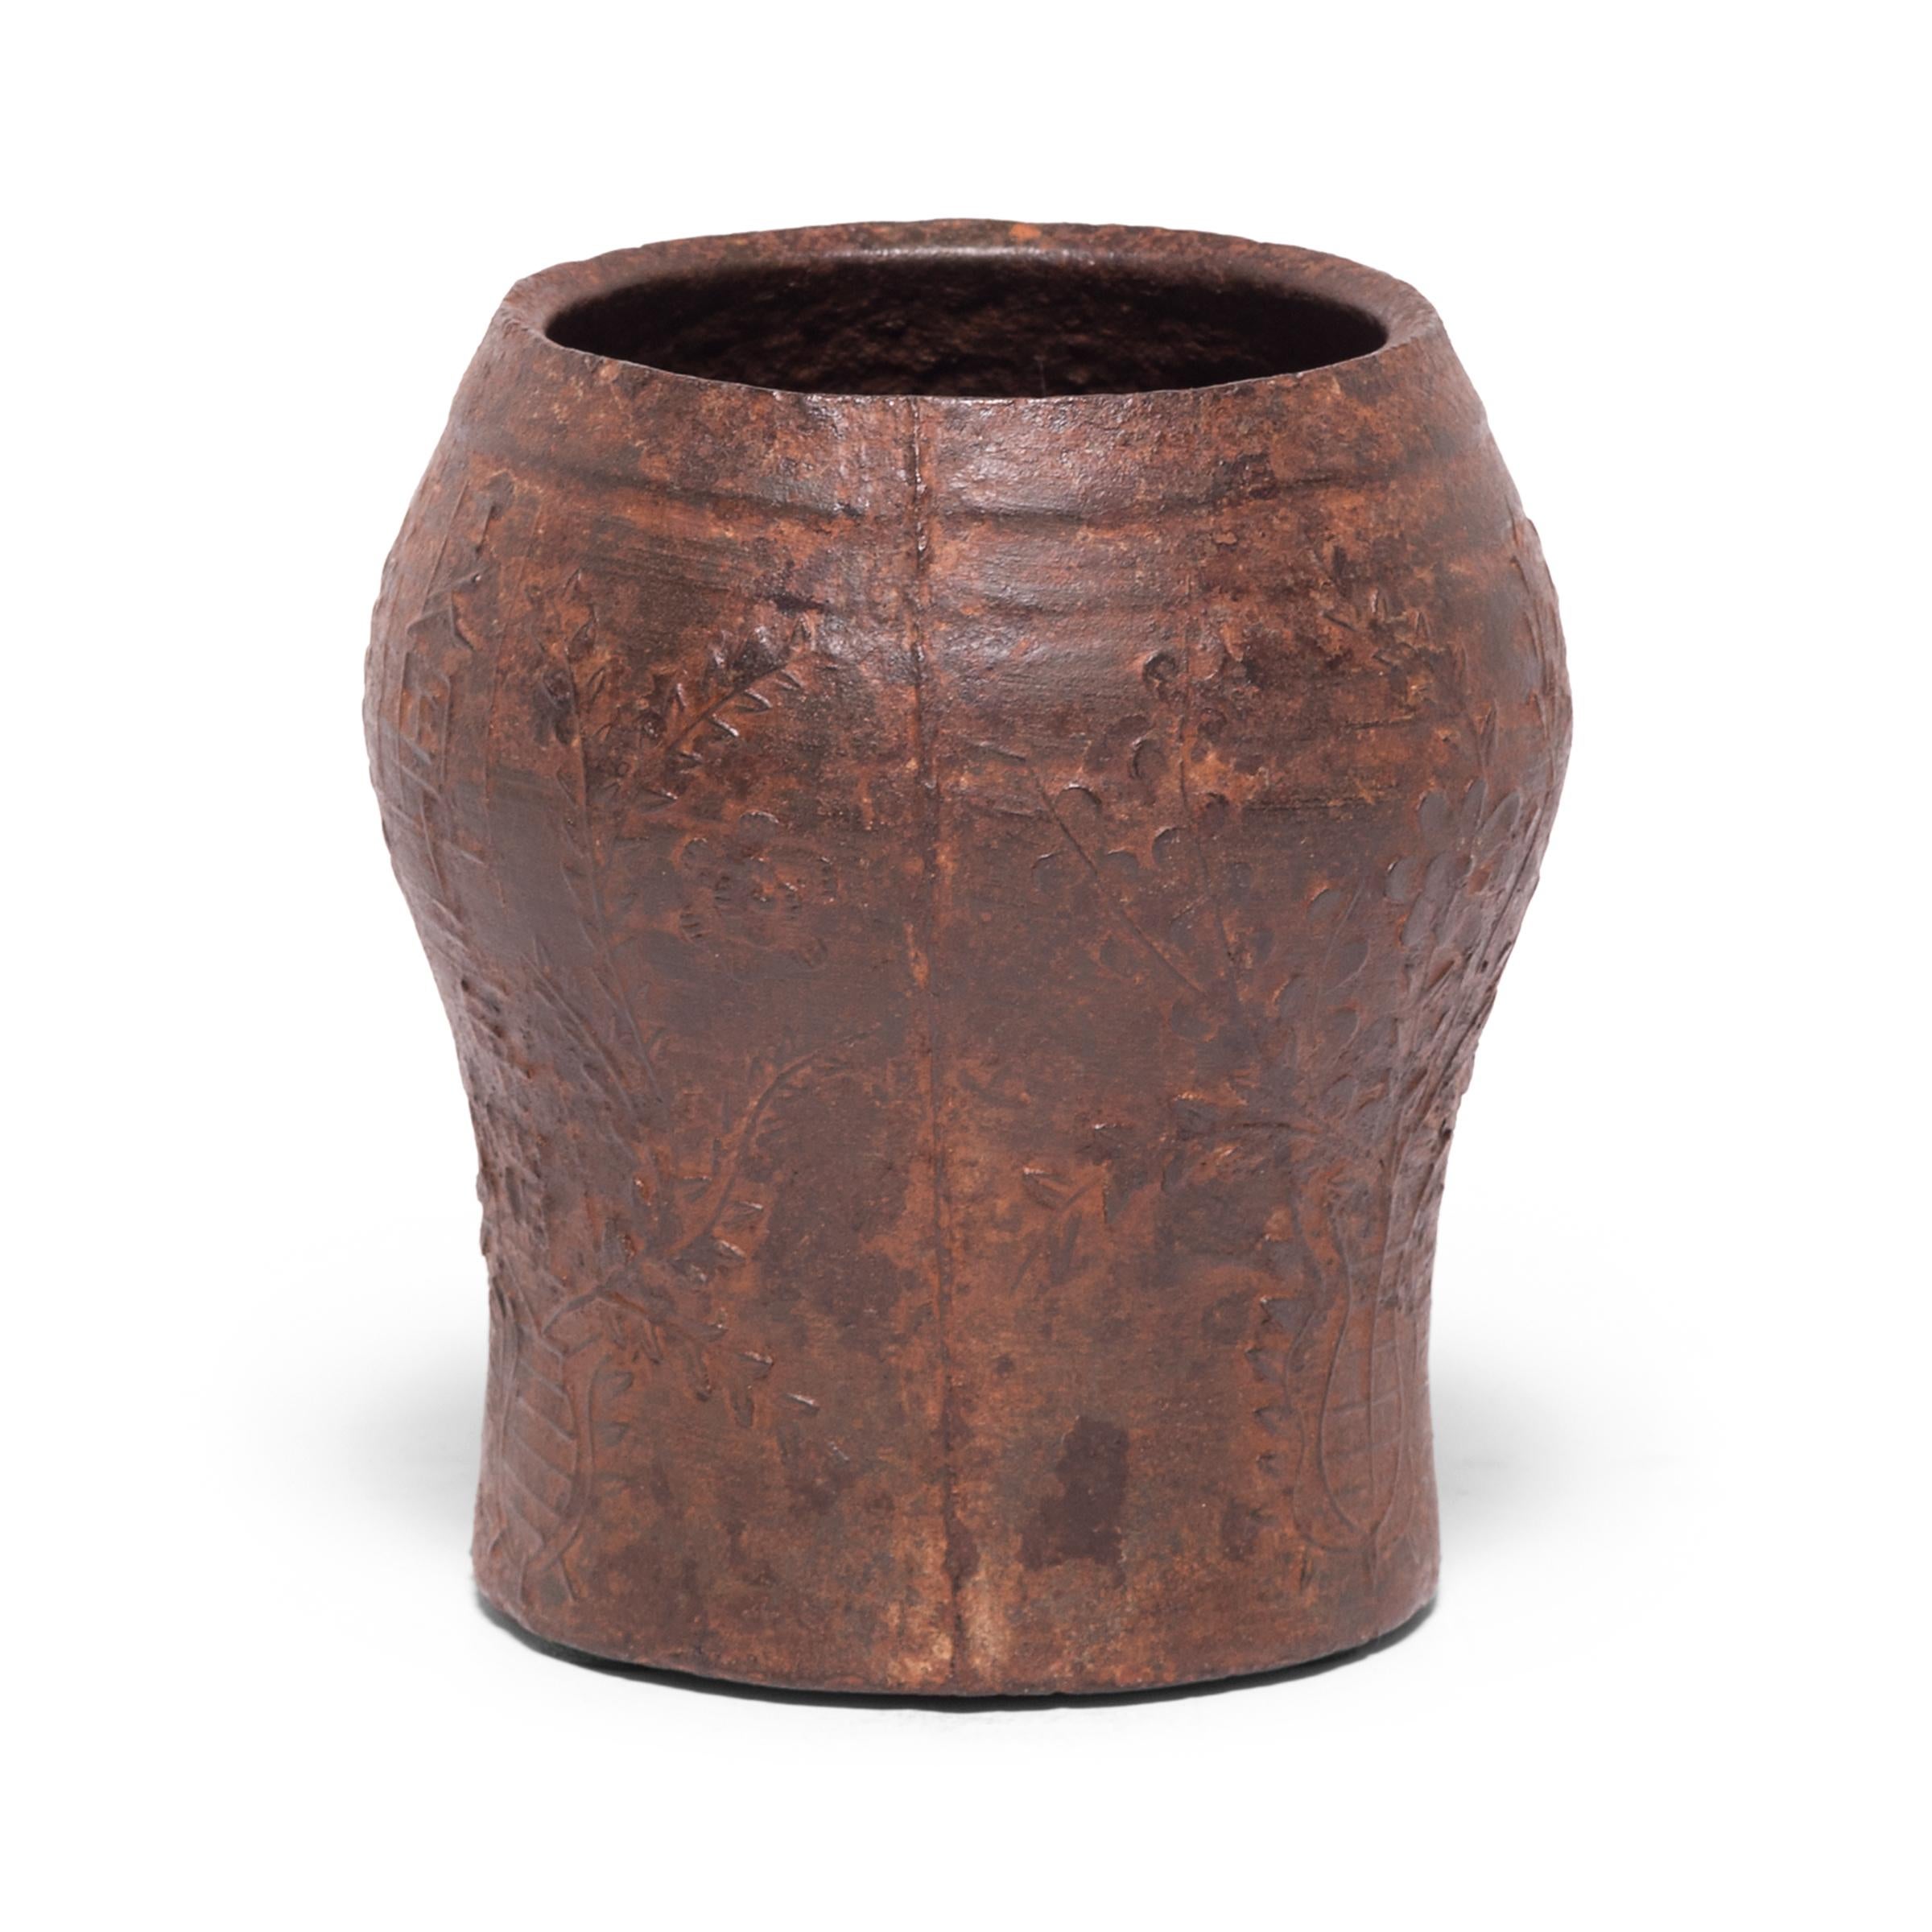 Cast in iron with a raised floral design, this vintage mortar was originally used in a traditional apothecary to create herbal medicines. The swelling shape allowed free movement of a pestle to effectively grind, mash, and macerate herbs and seeds